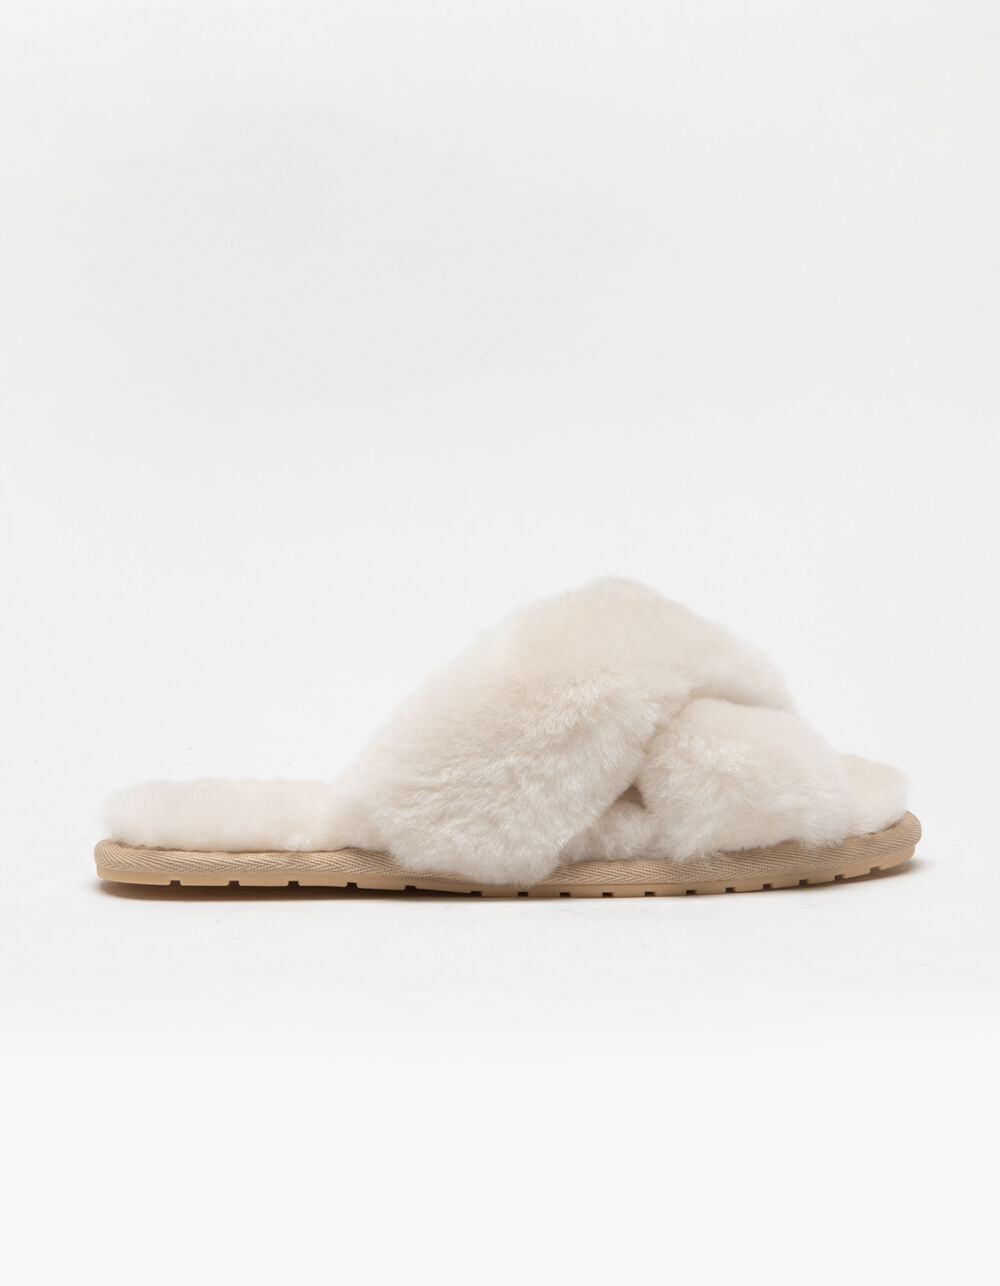 EMU AUSTRALIA Mayberry Womens Slippers - NATURAL | Tillys